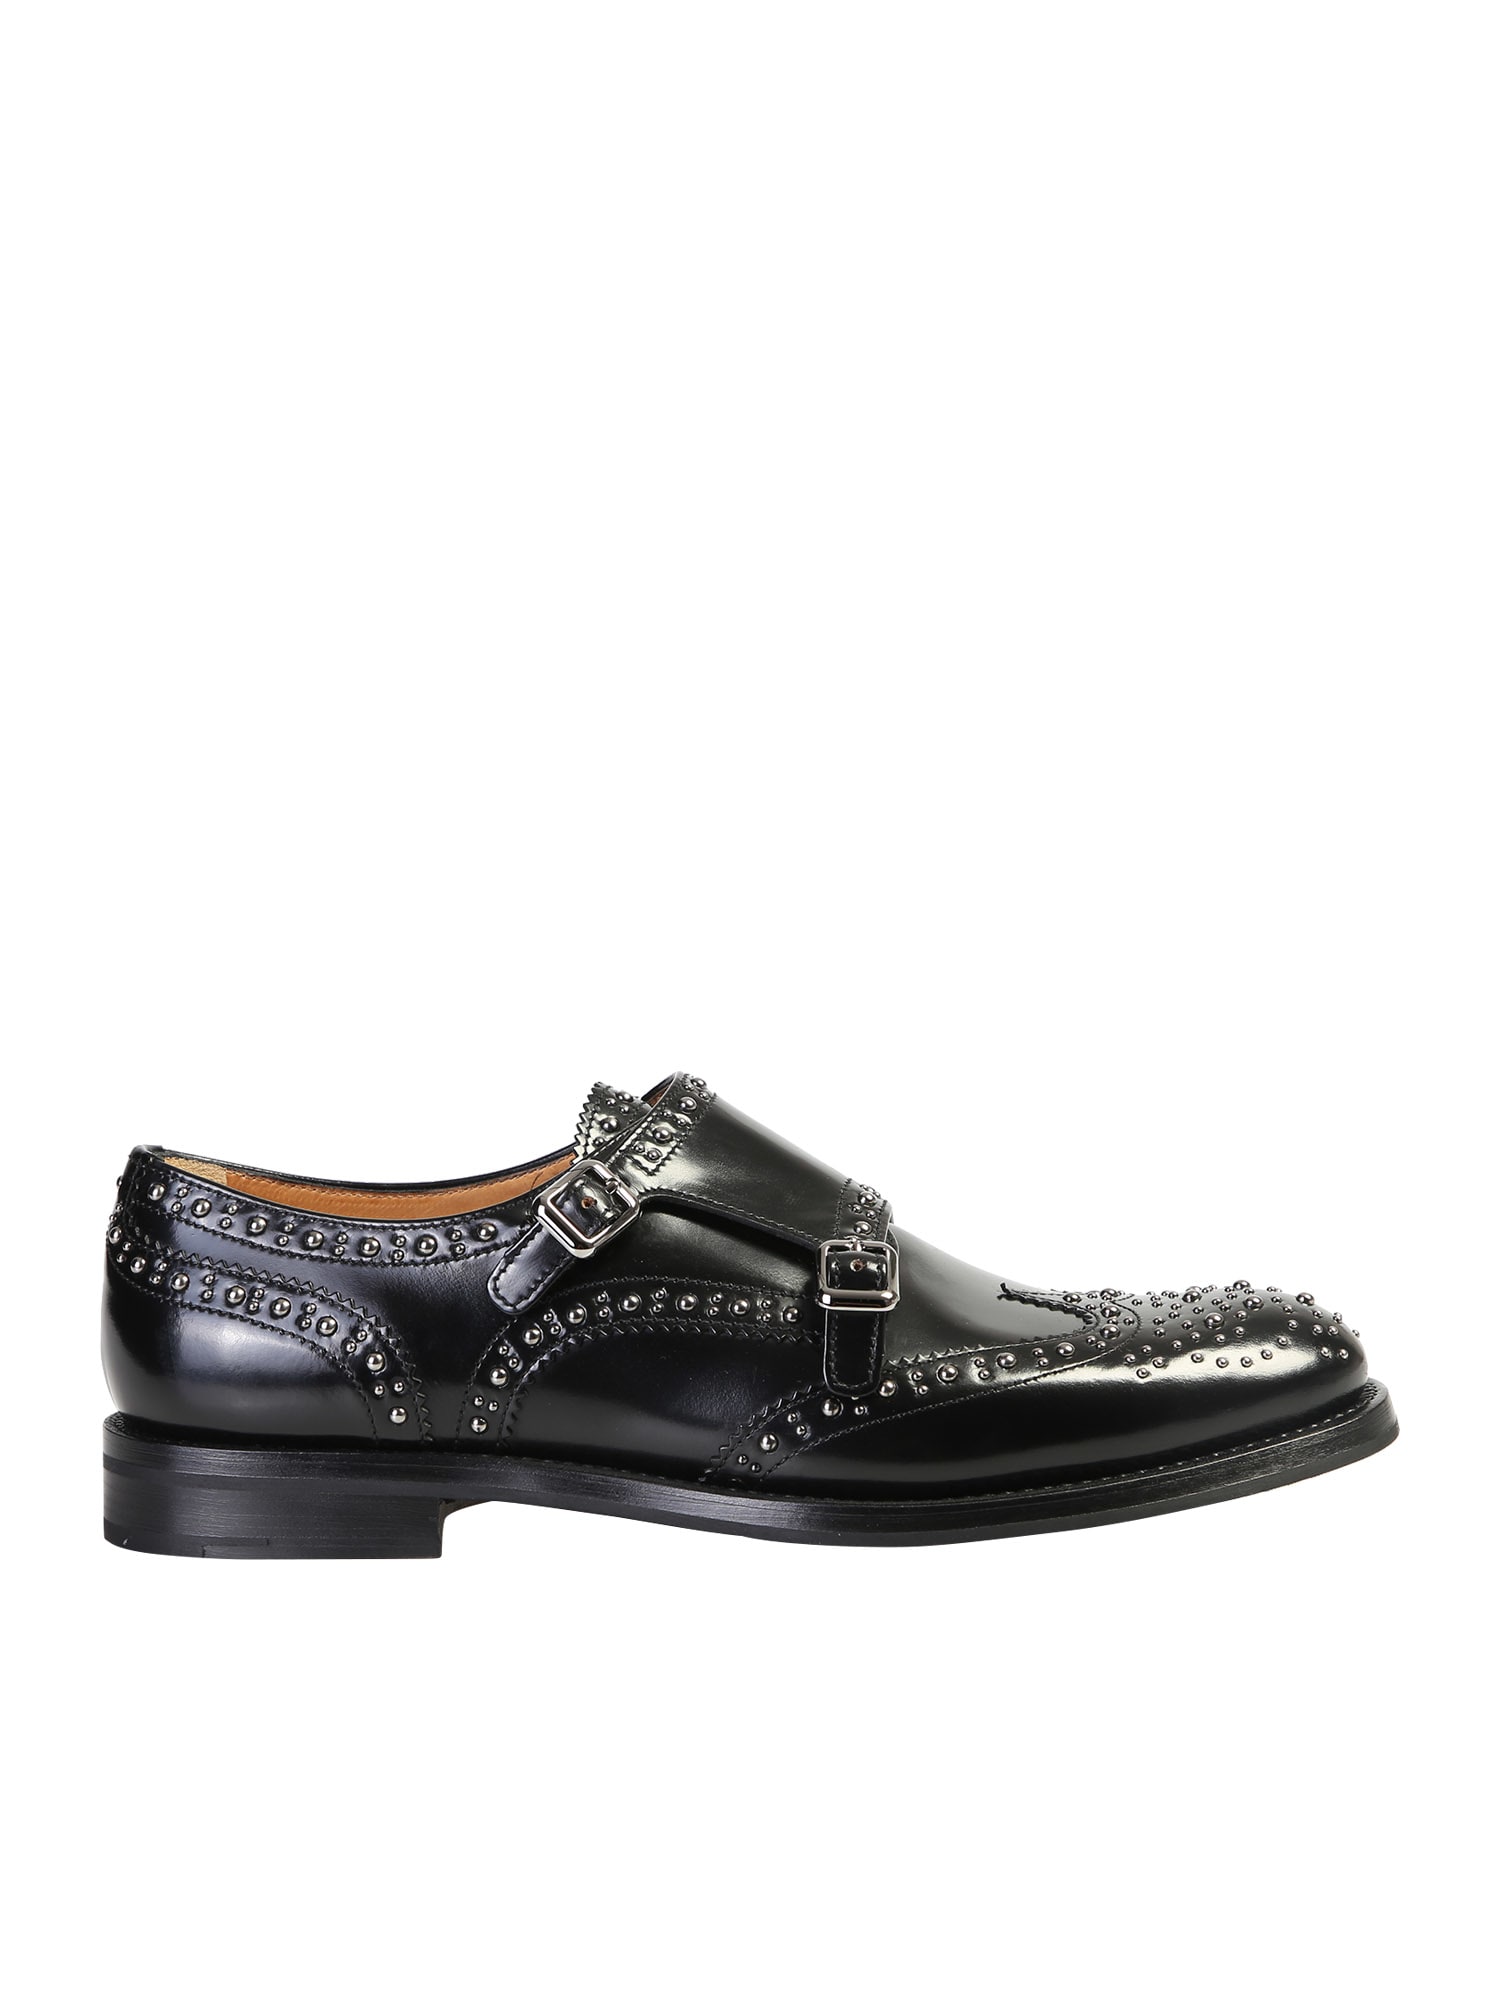 Church's Sybille Shoes In Black